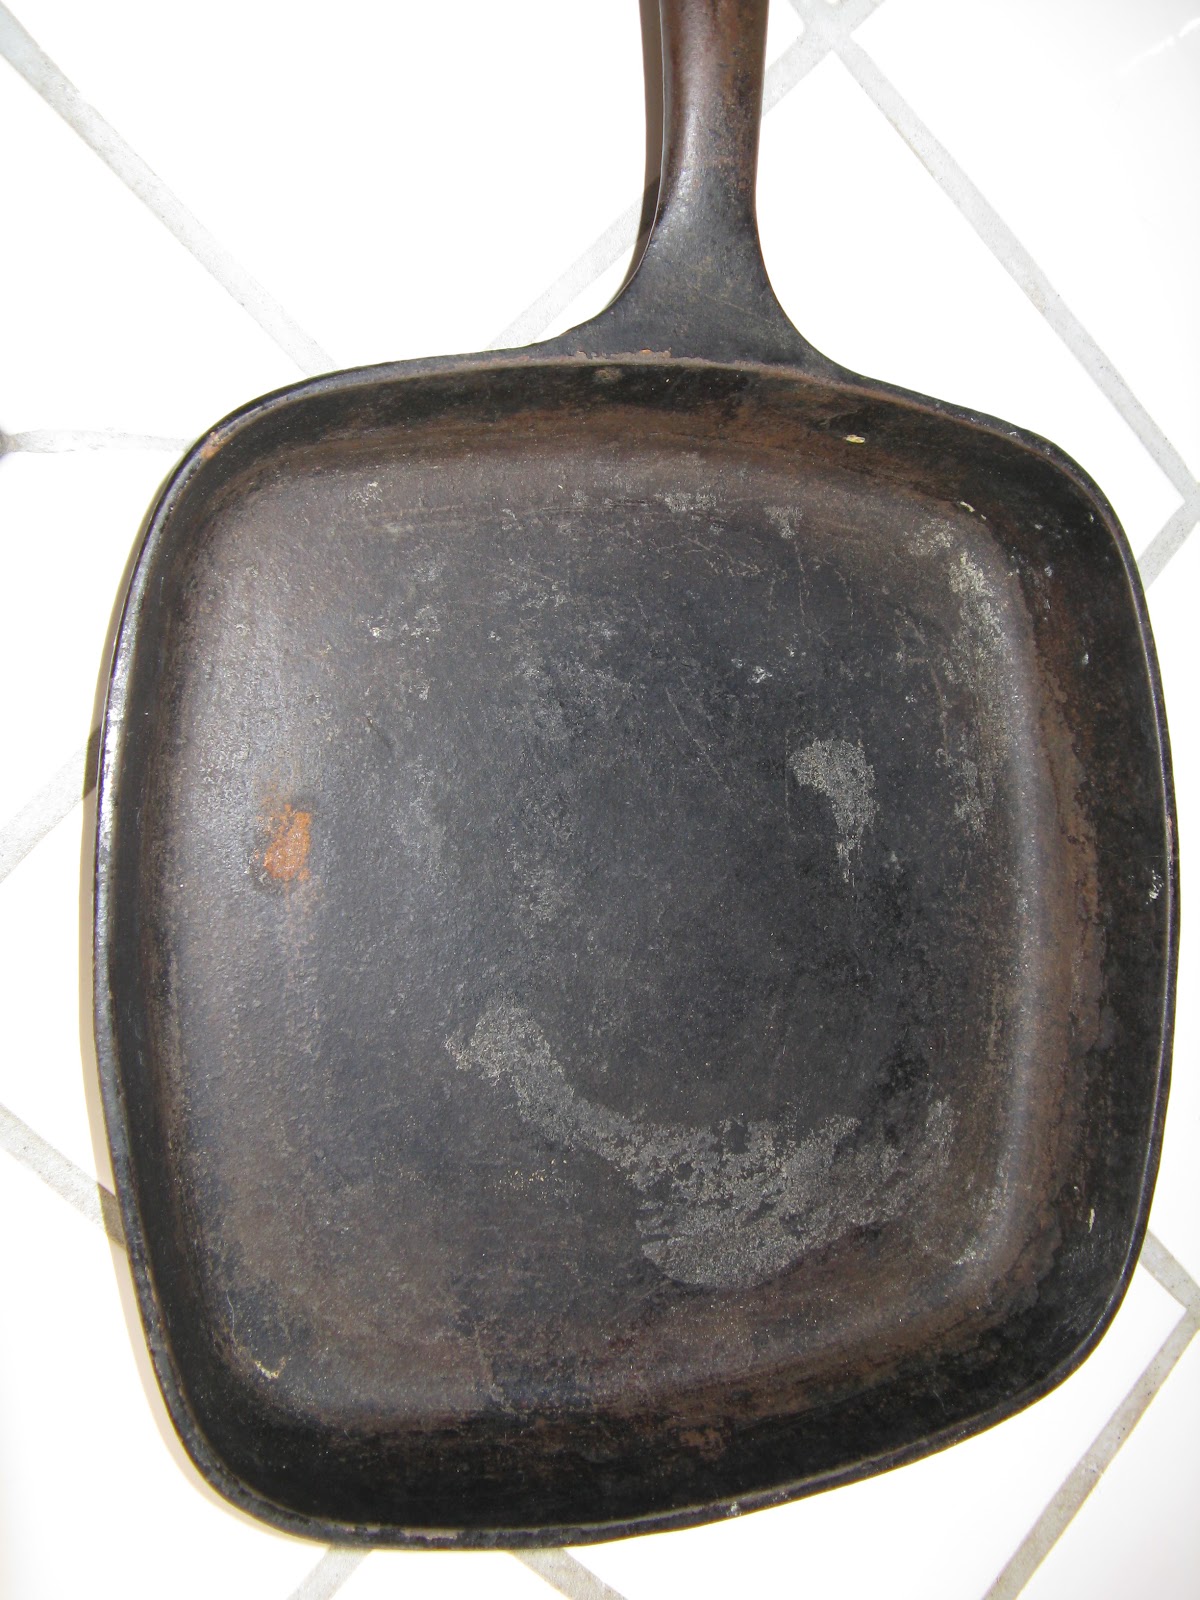 Griswold Cast Iron Cleaning and Seasoning